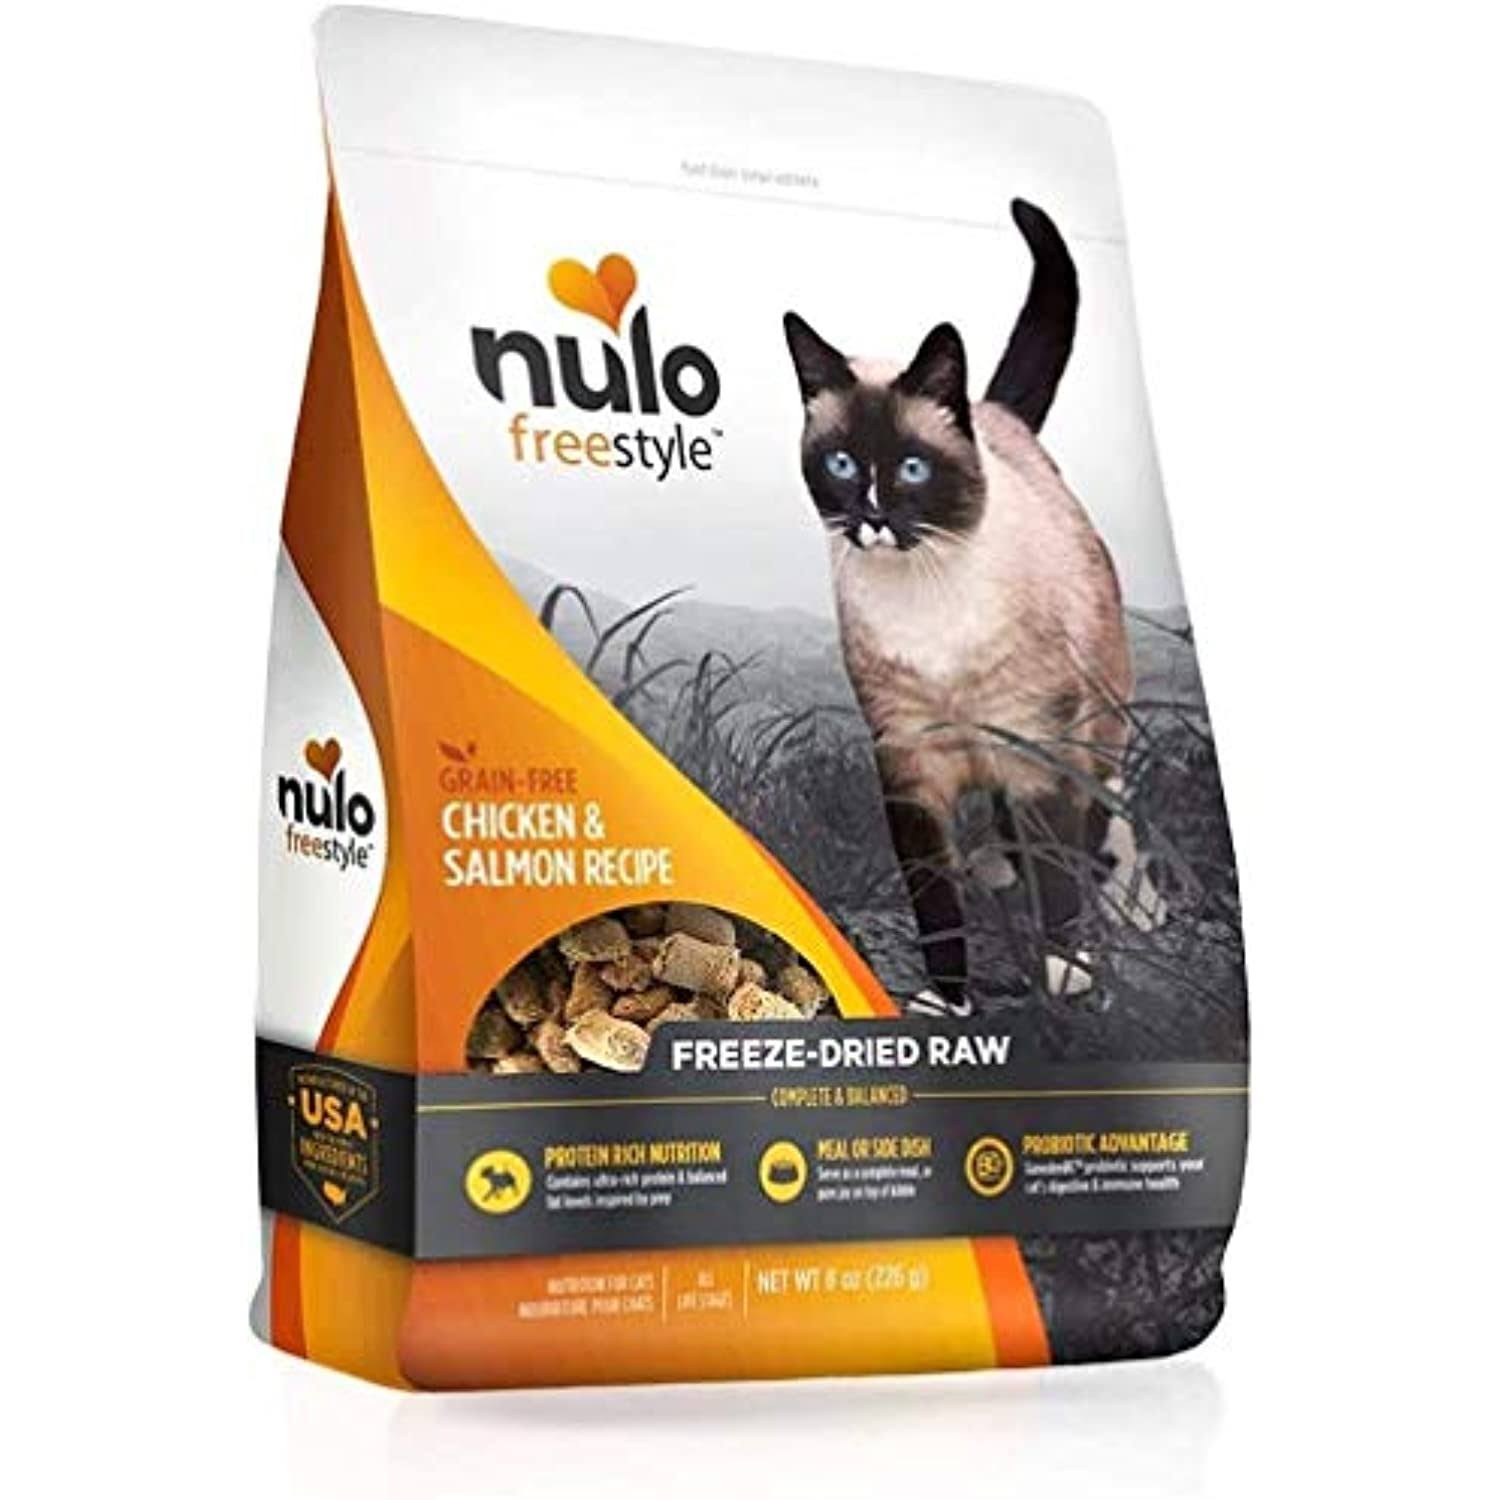 Nulo Freestyle Freeze-Dried Raw Cat Food - Grain Free Cat Food with